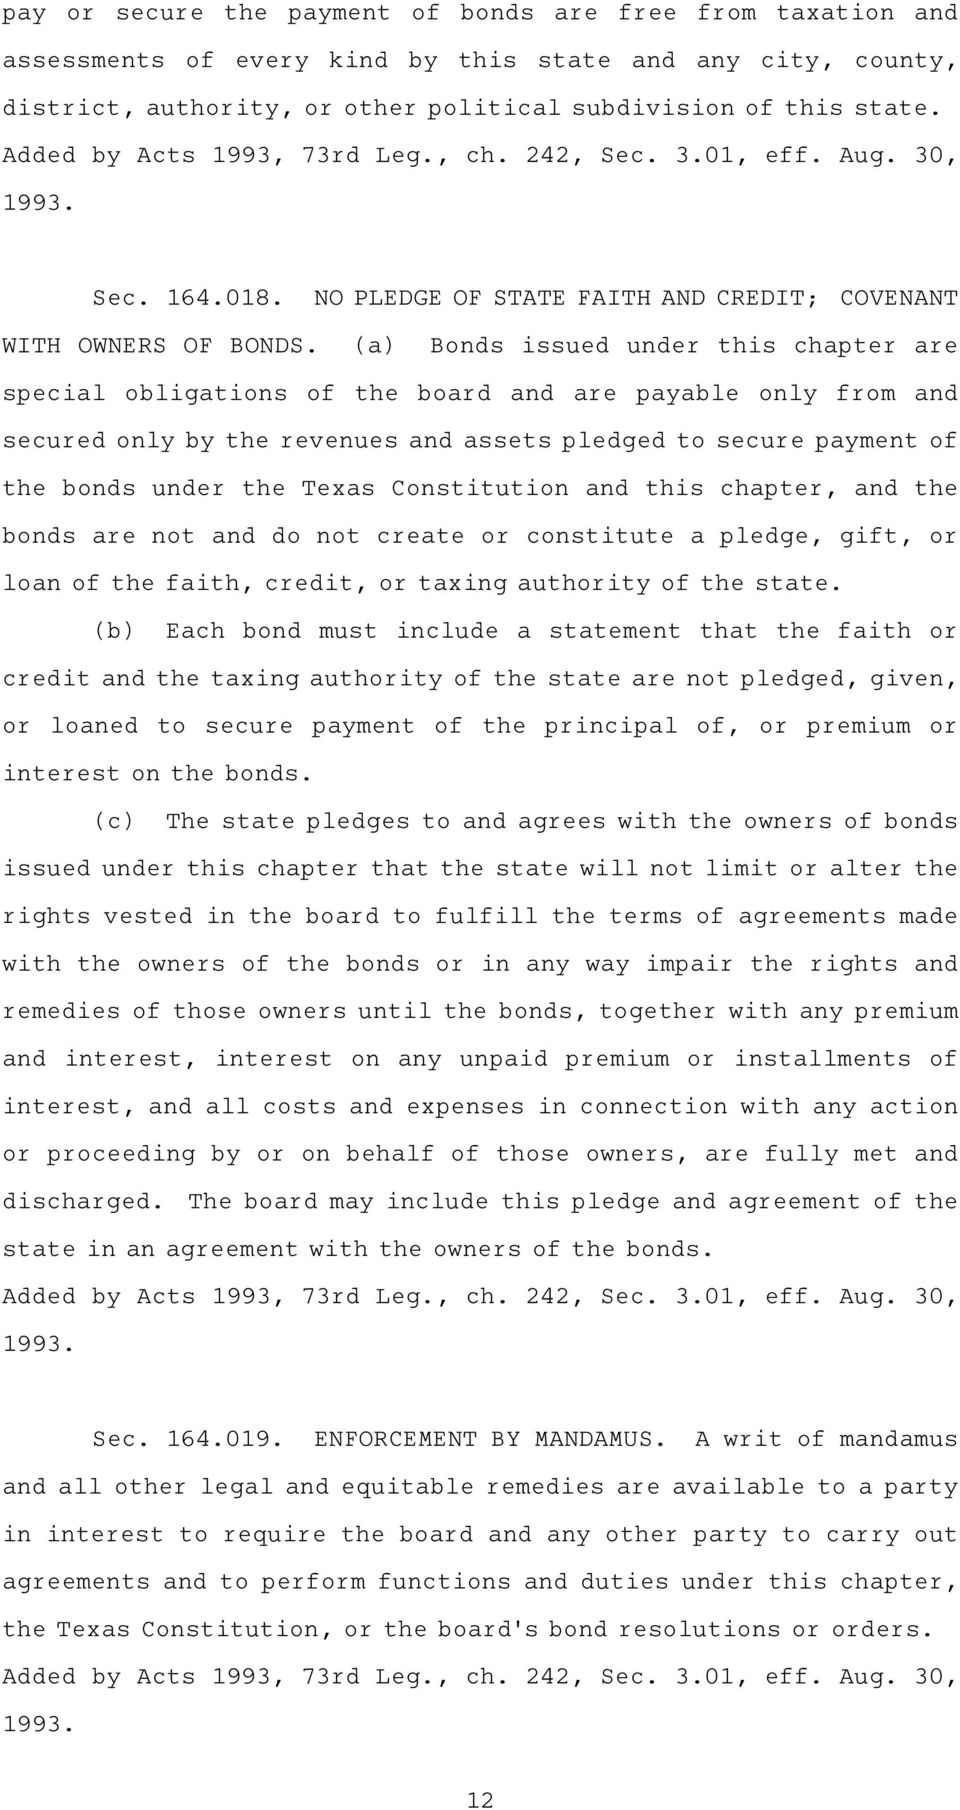 (a) Bonds issued under this chapter are special obligations of the board and are payable only from and secured only by the revenues and assets pledged to secure payment of the bonds under the Texas